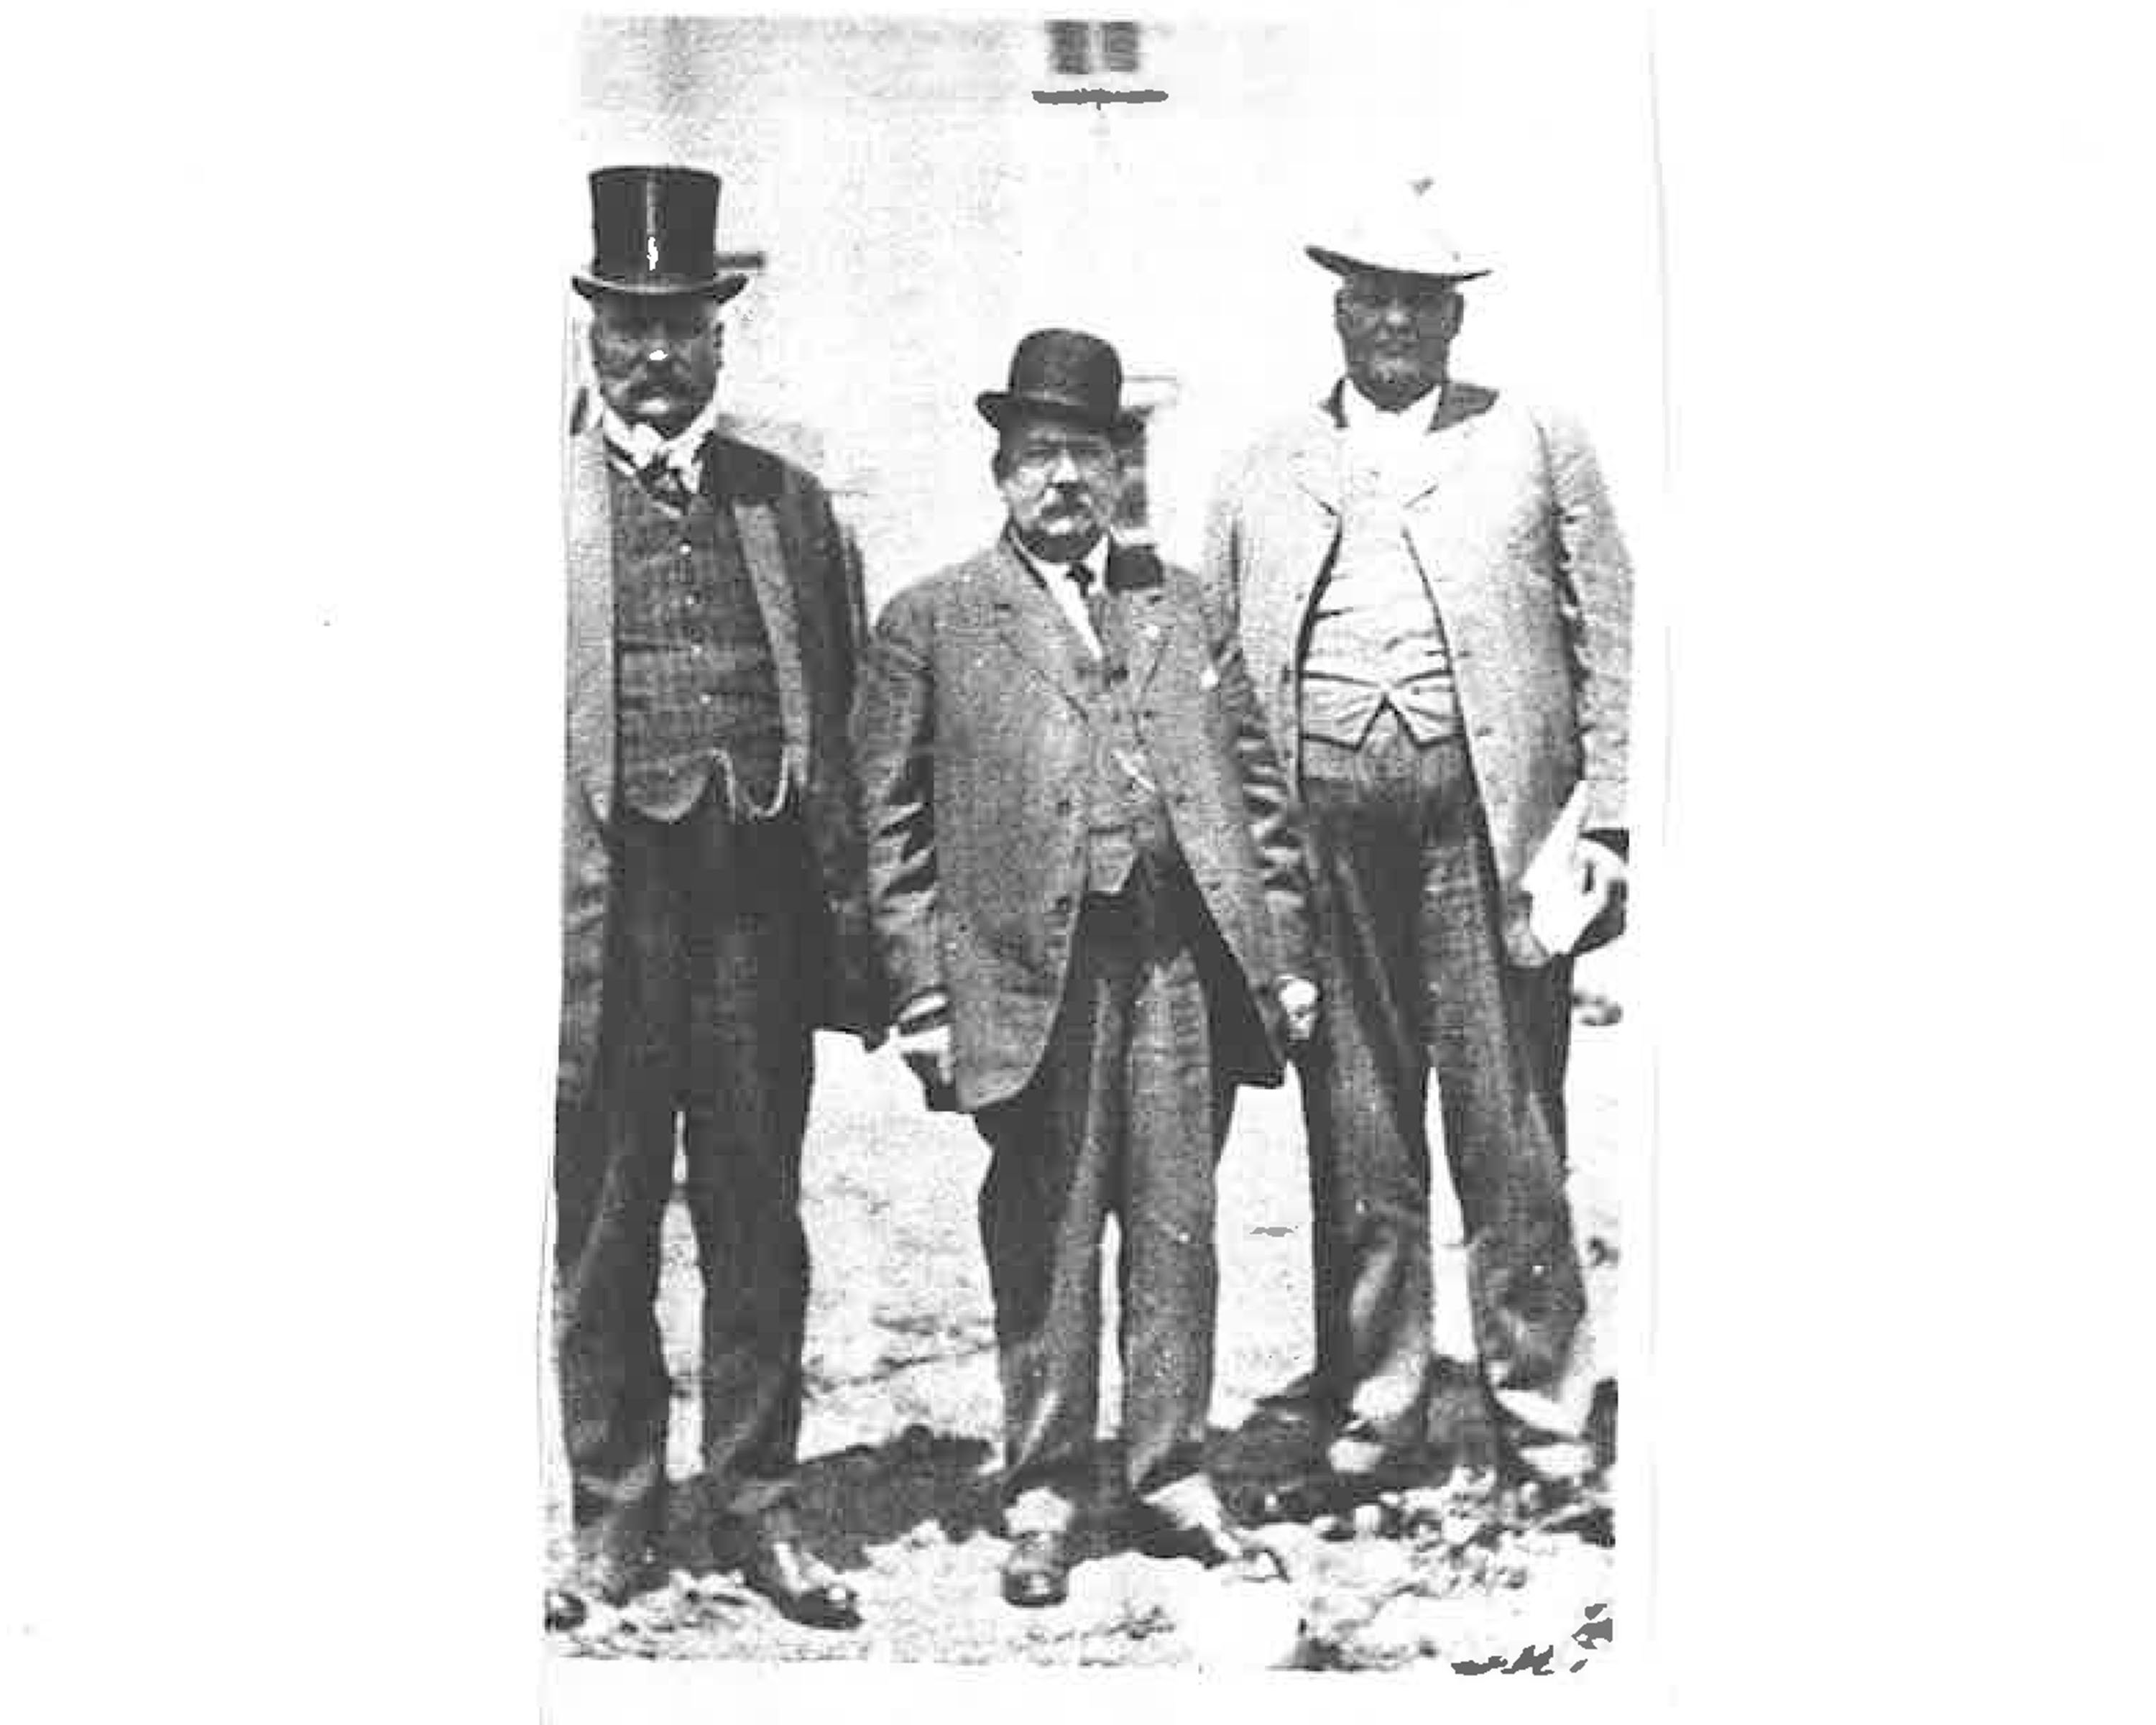 One of the few photos showing William Preston Hall (left) with Ed. L. Brannan and Bert McCain behind the big barn in about 1915.